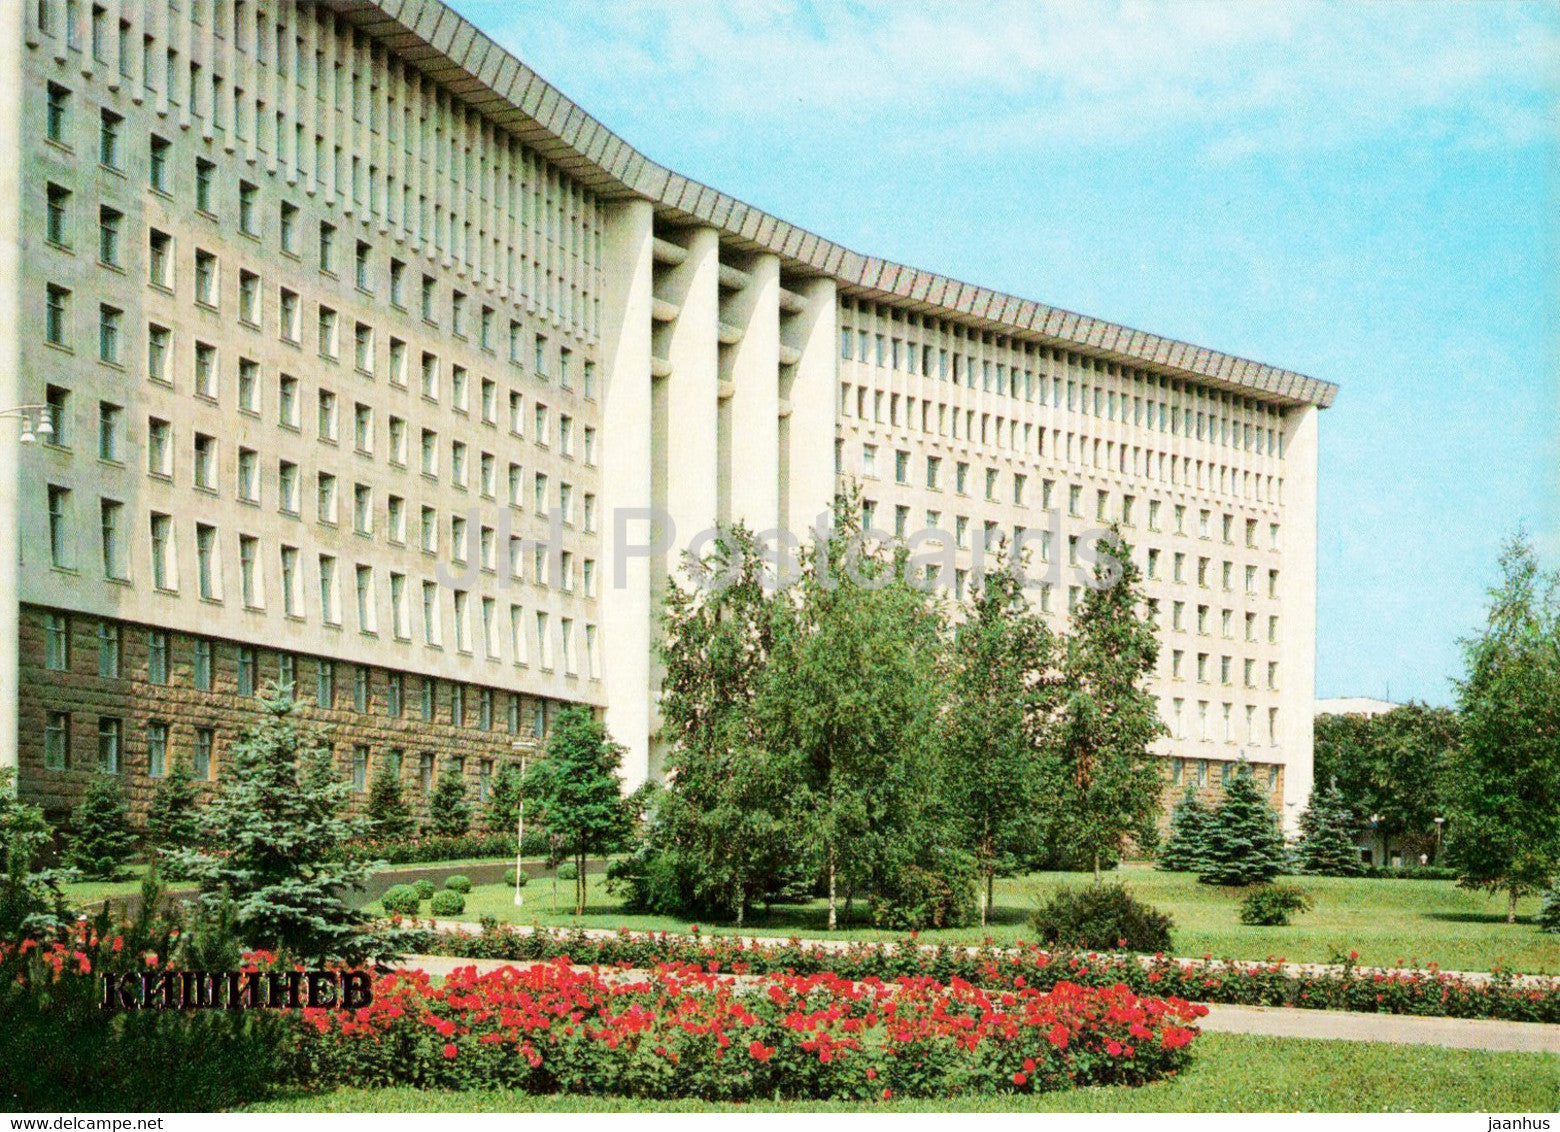 The building of the Central Committee of the CP of Moldavia - Chisinau - Kishinev - 1 - 1983 - Moldova USSR - unused - JH Postcards